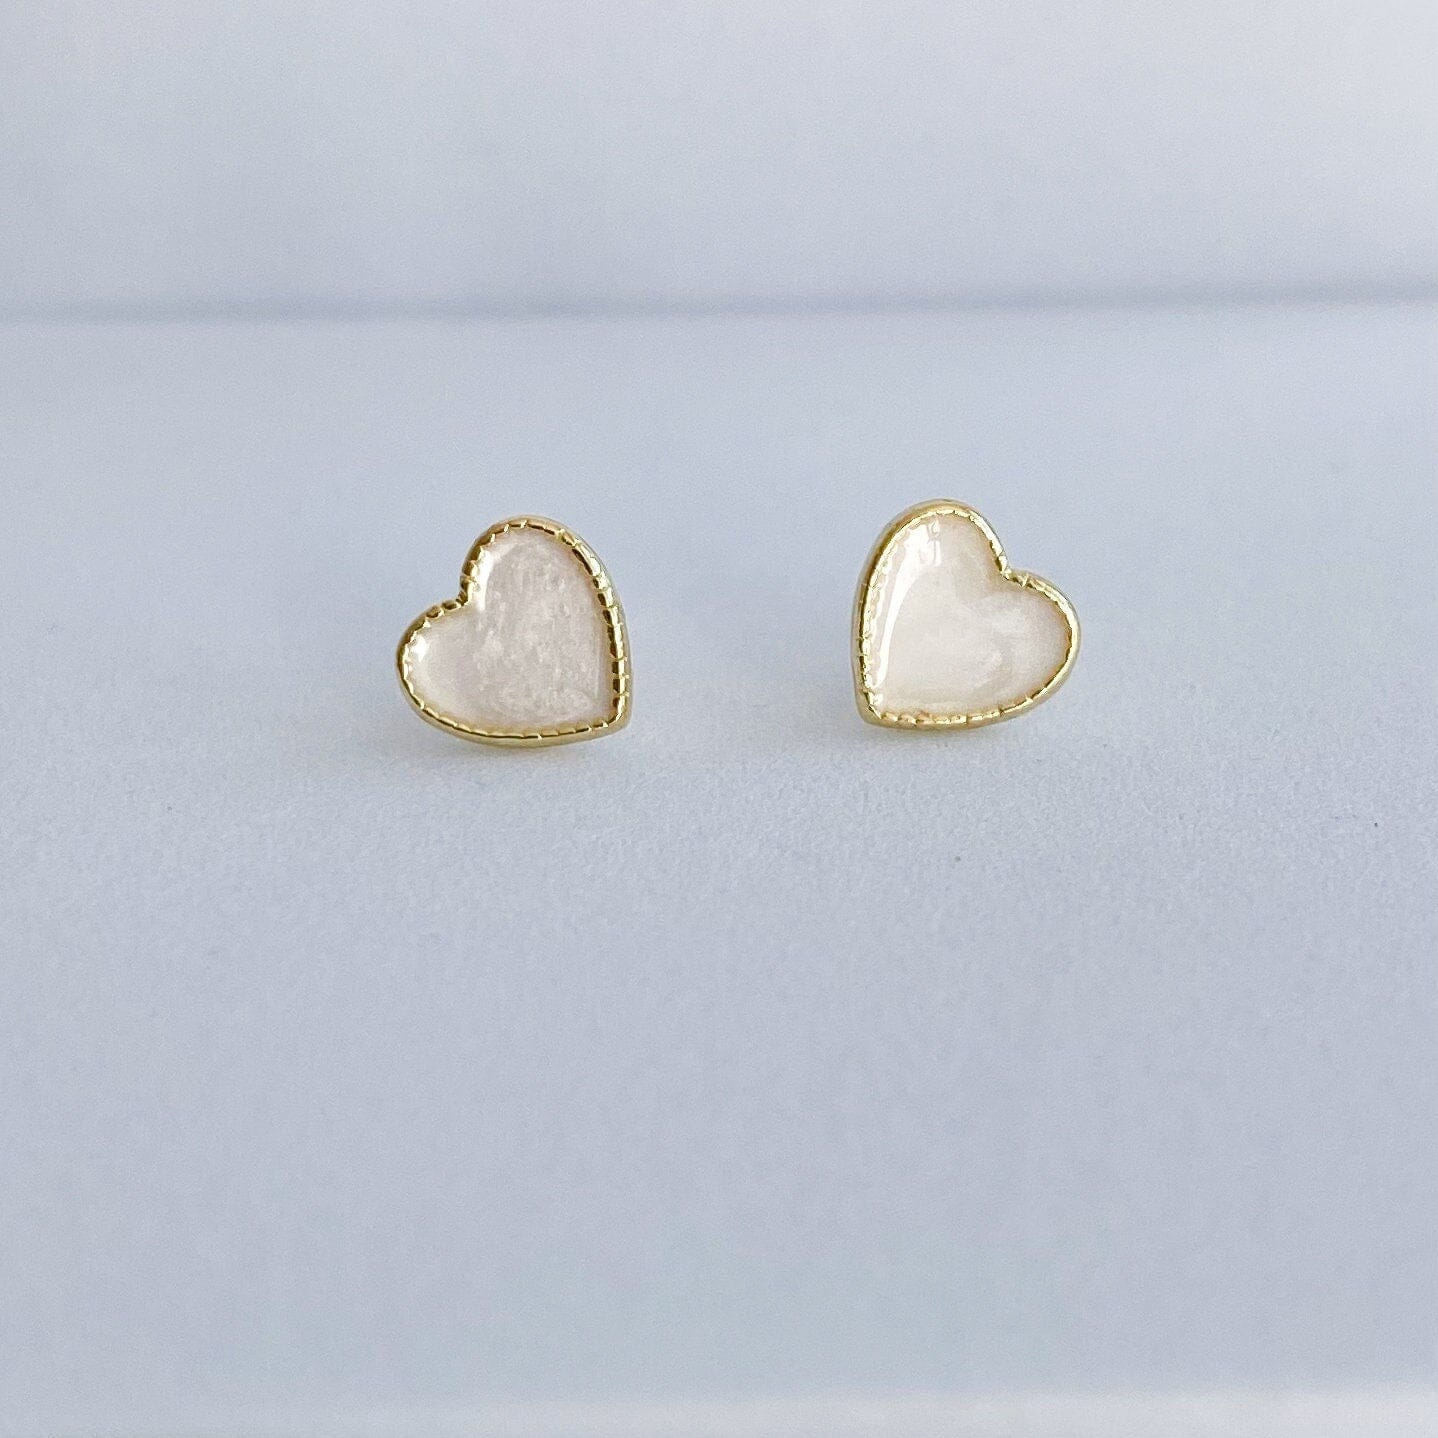 Friendship gift with heart stud earrings, Tiny minimal Jewellery gift for her, Best friend Birthday Christmas gift